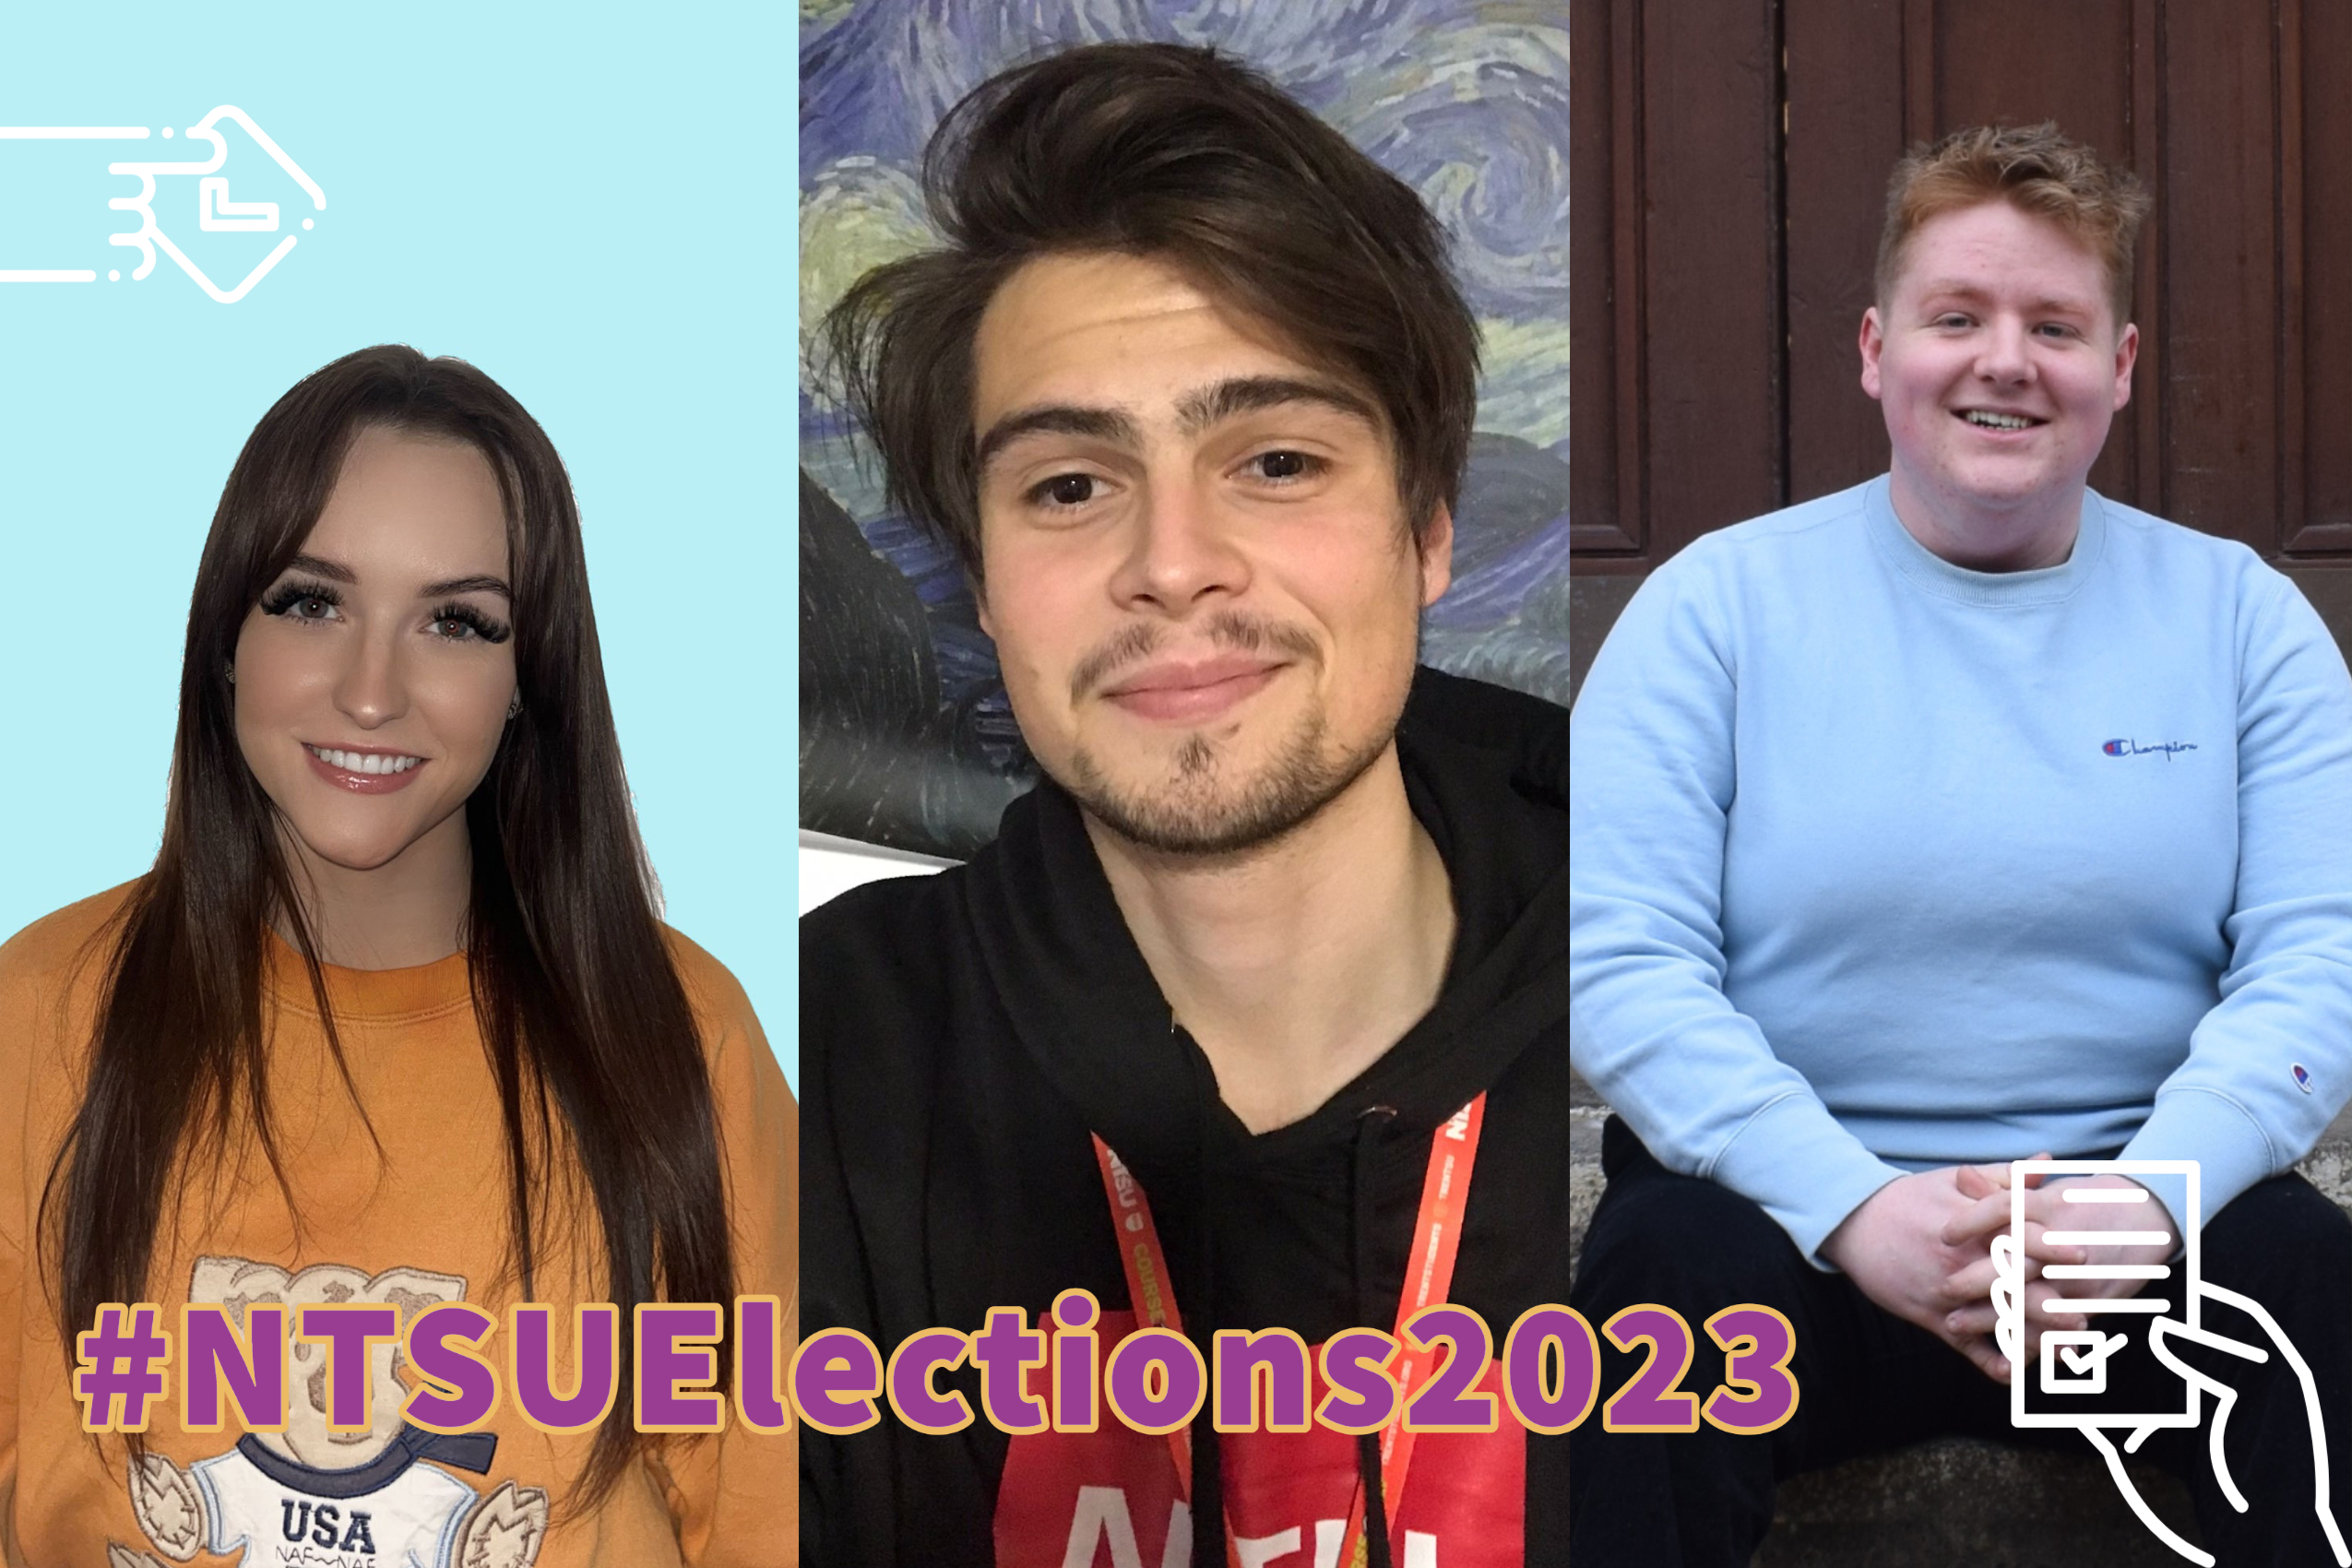 Meet your NTSU President candidates for #NTSUElections2023